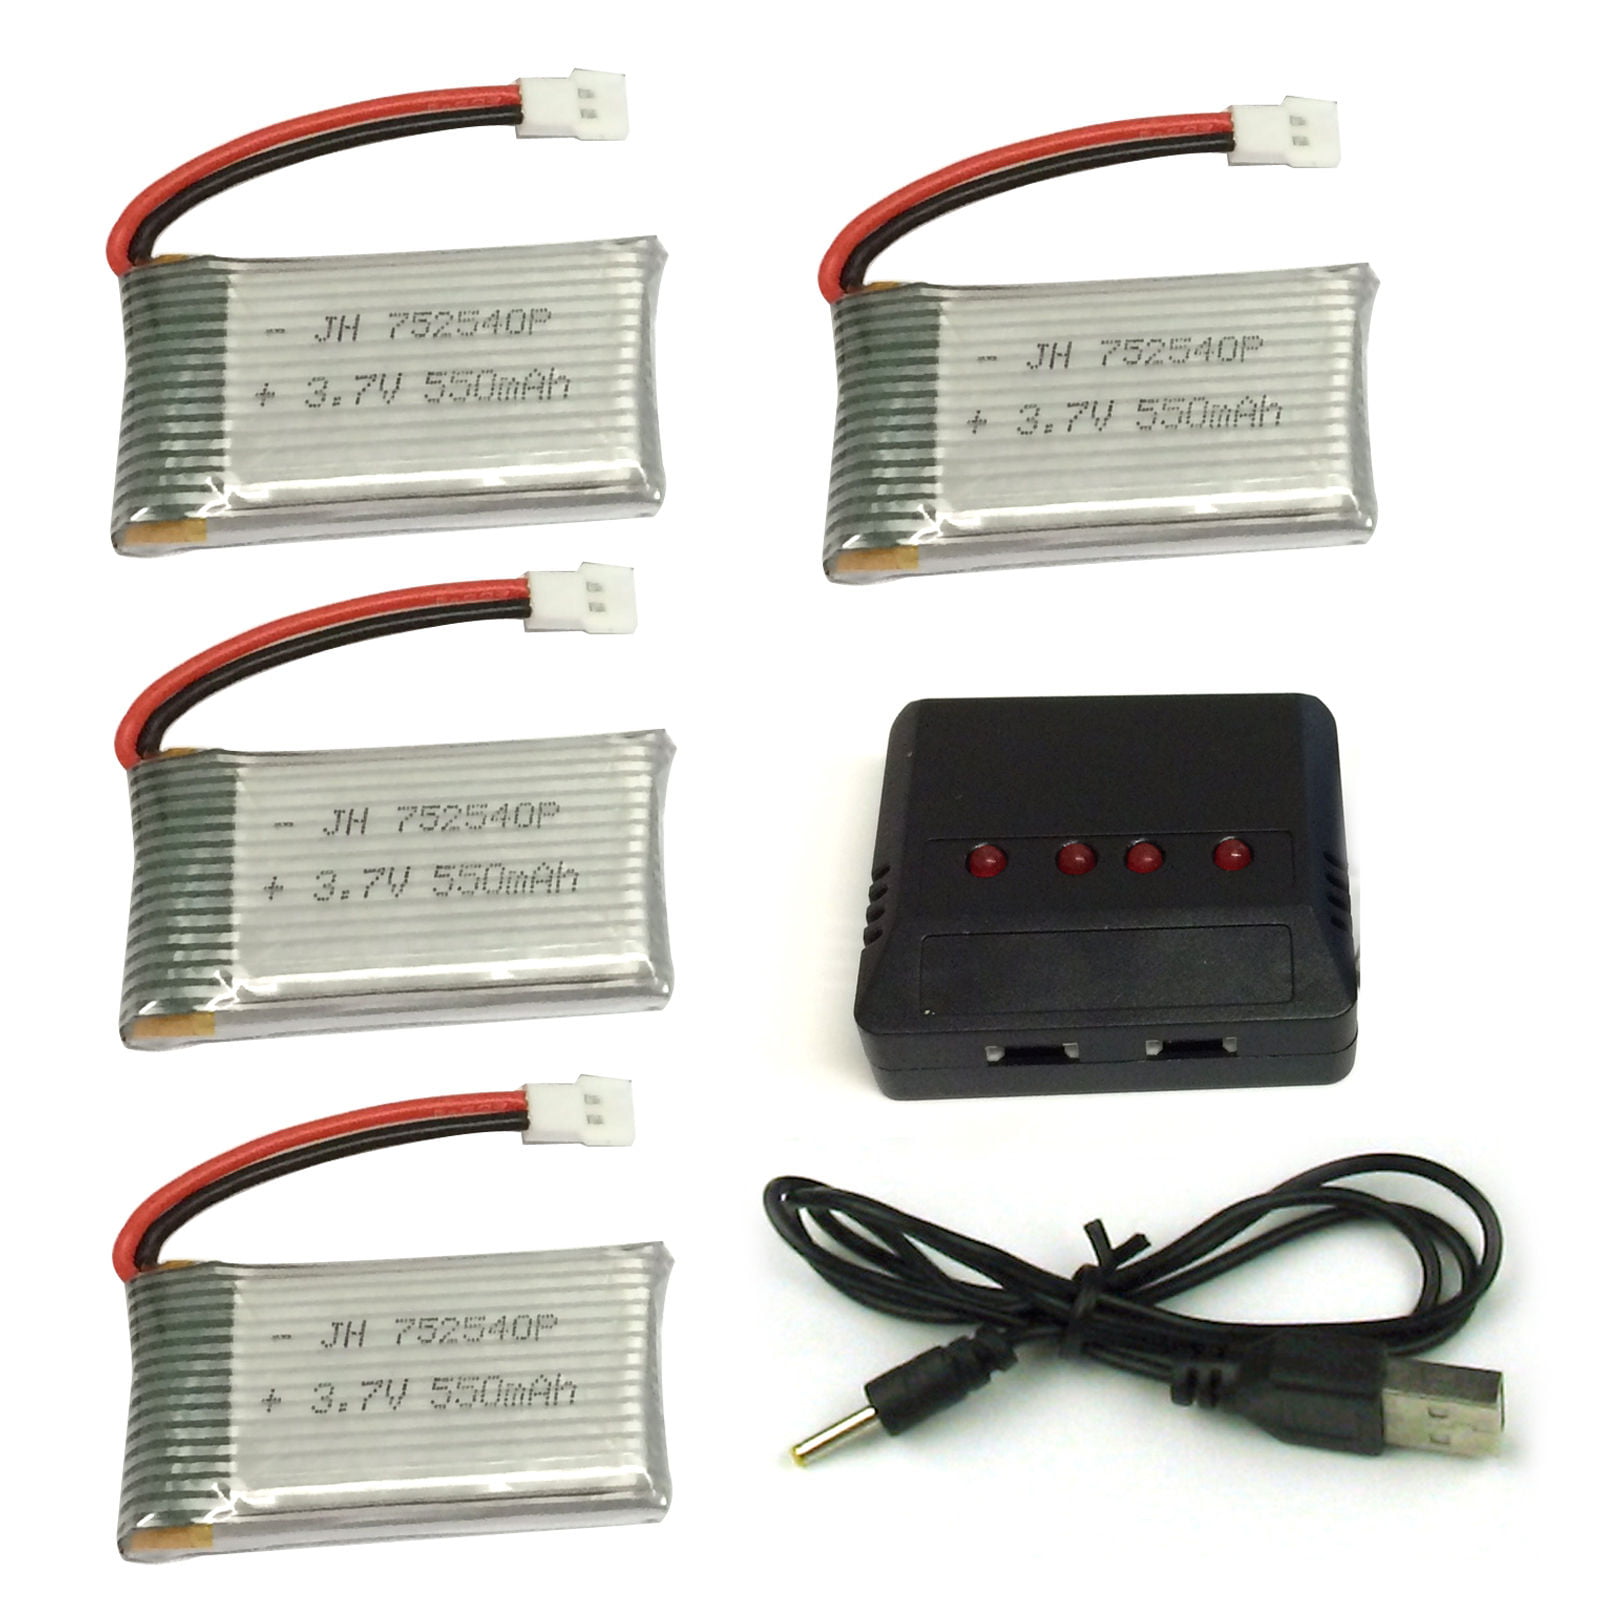 Cheerwing 3.7V 550mAh Lipo Battery (4PCS) with 4 In 1 Battery Charger for Syma  X5SW X5 X5C X5C-1 RC Quadcopter Drone Parts - Walmart.com